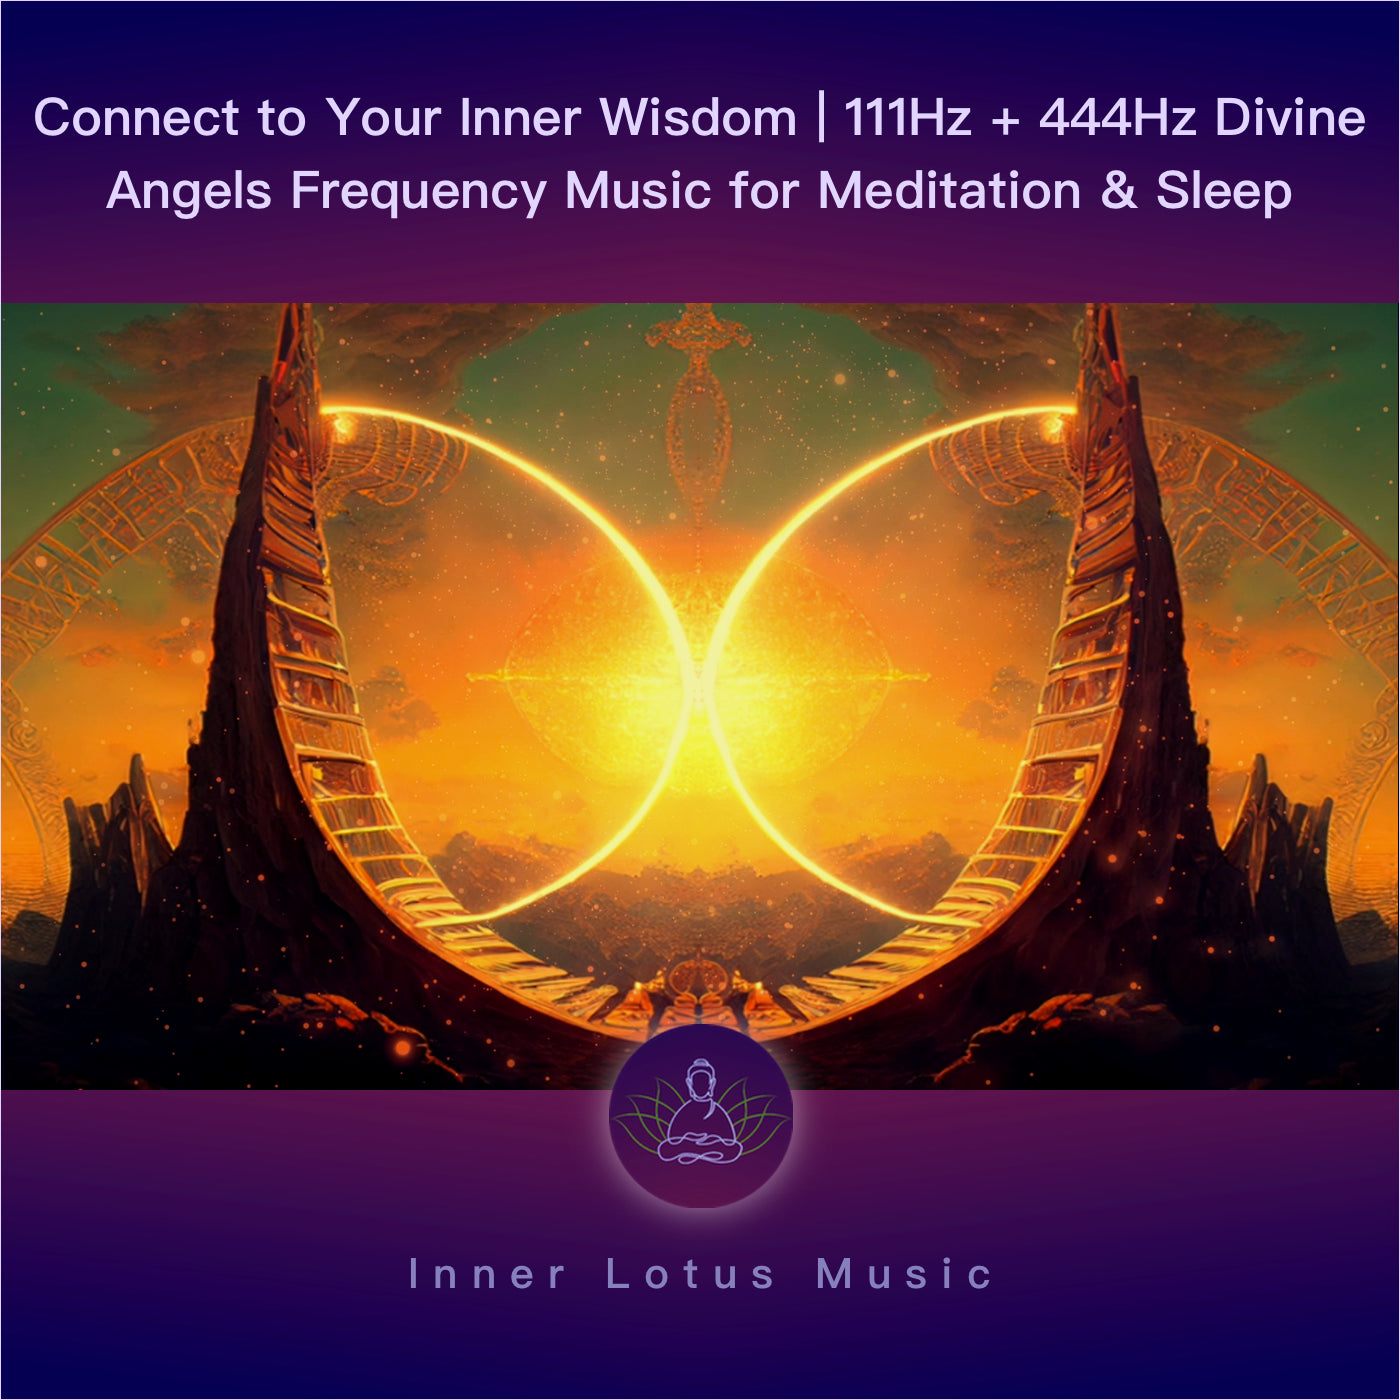 Connect to Your Inner Wisdom | 111Hz + 444Hz Divine & Angels Frequency Music for Meditation & Sleep